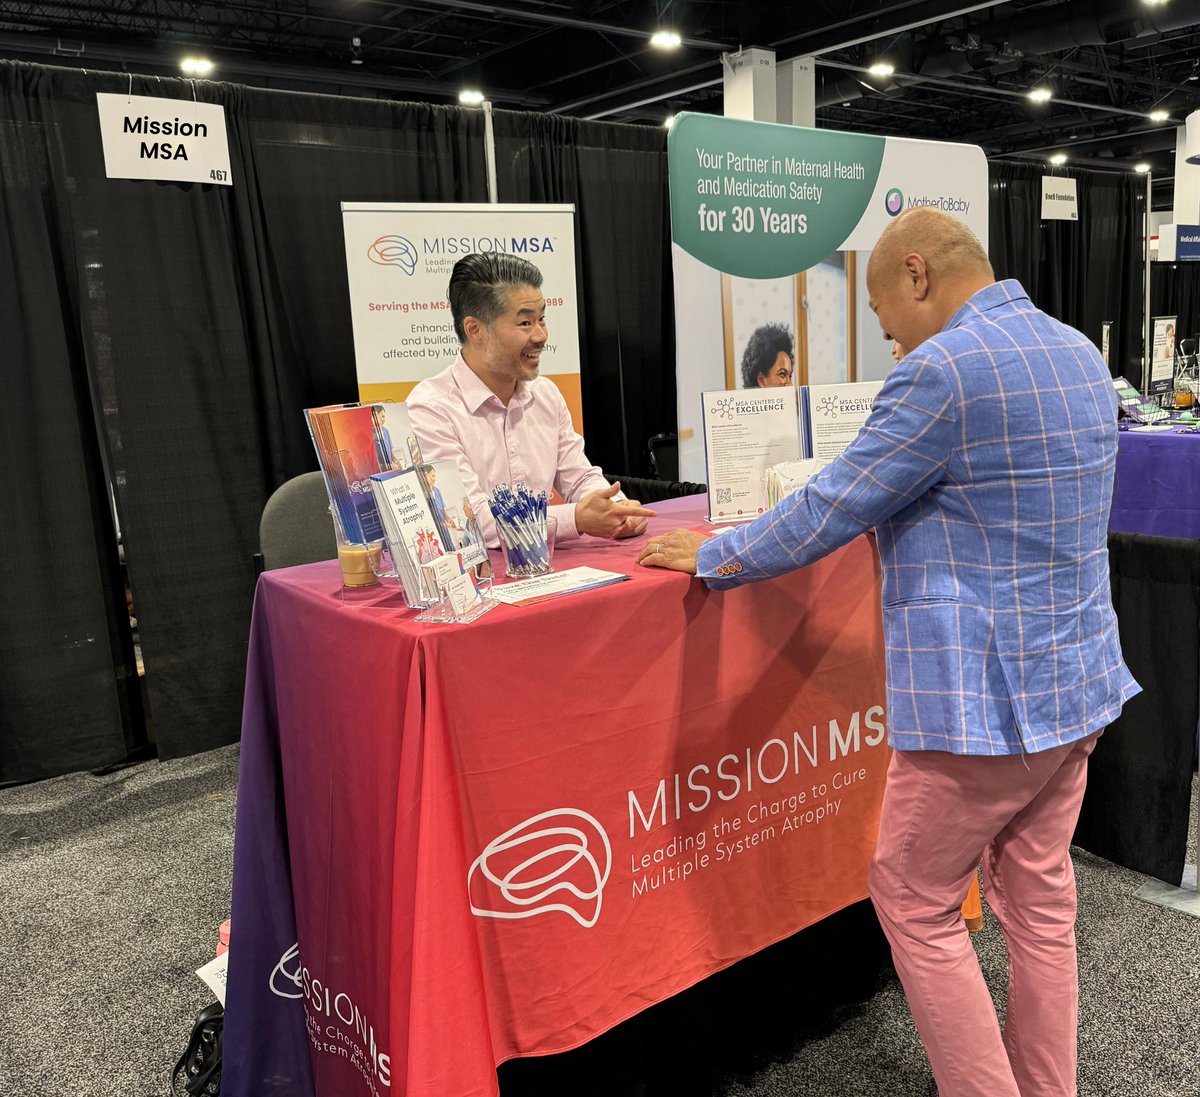 Kicking off our first day at @AANmember's #AAN2024 in Denver, Colorado and we couldn't be more excited! 🧠🧠Meeting incredible minds, sharing insights, diving deep into the latest in neurology. #MSA #multiplesystematrophy #neurology #AANAM #AAN #AmericanAcademyofNeurology